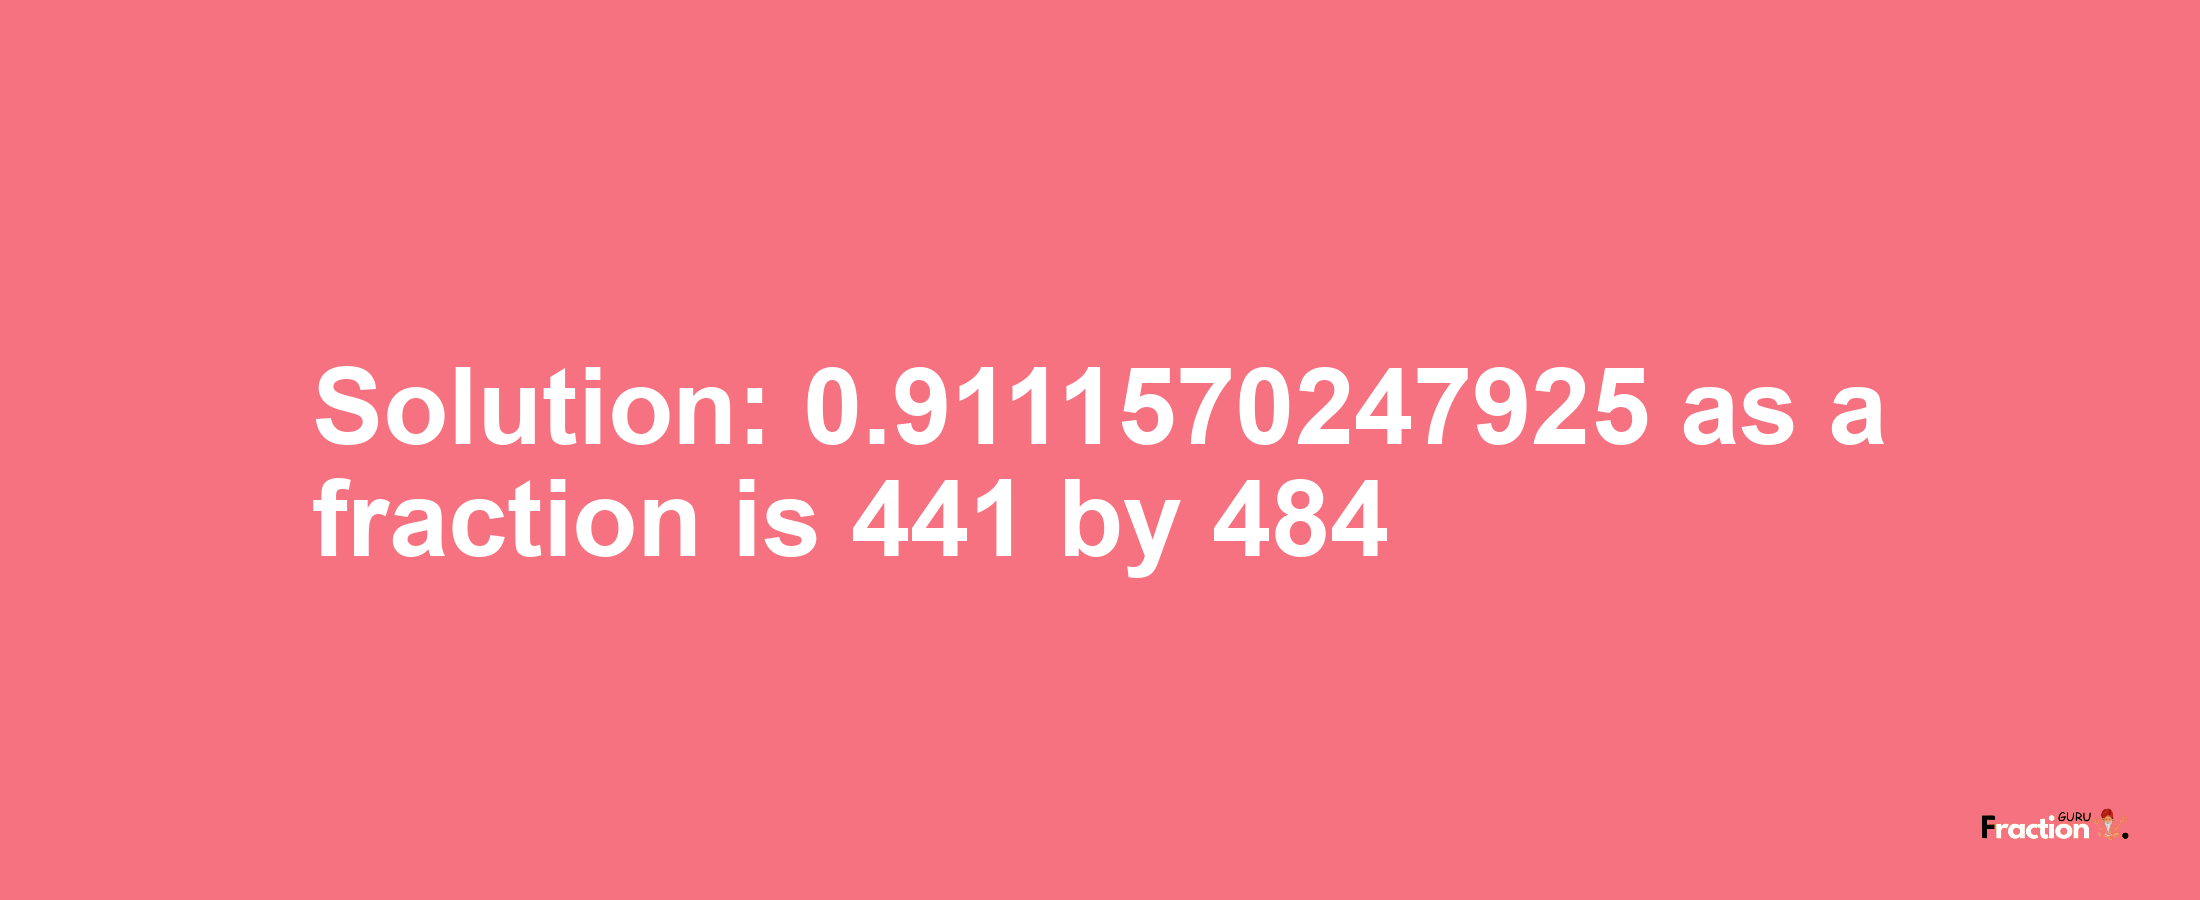 Solution:0.9111570247925 as a fraction is 441/484